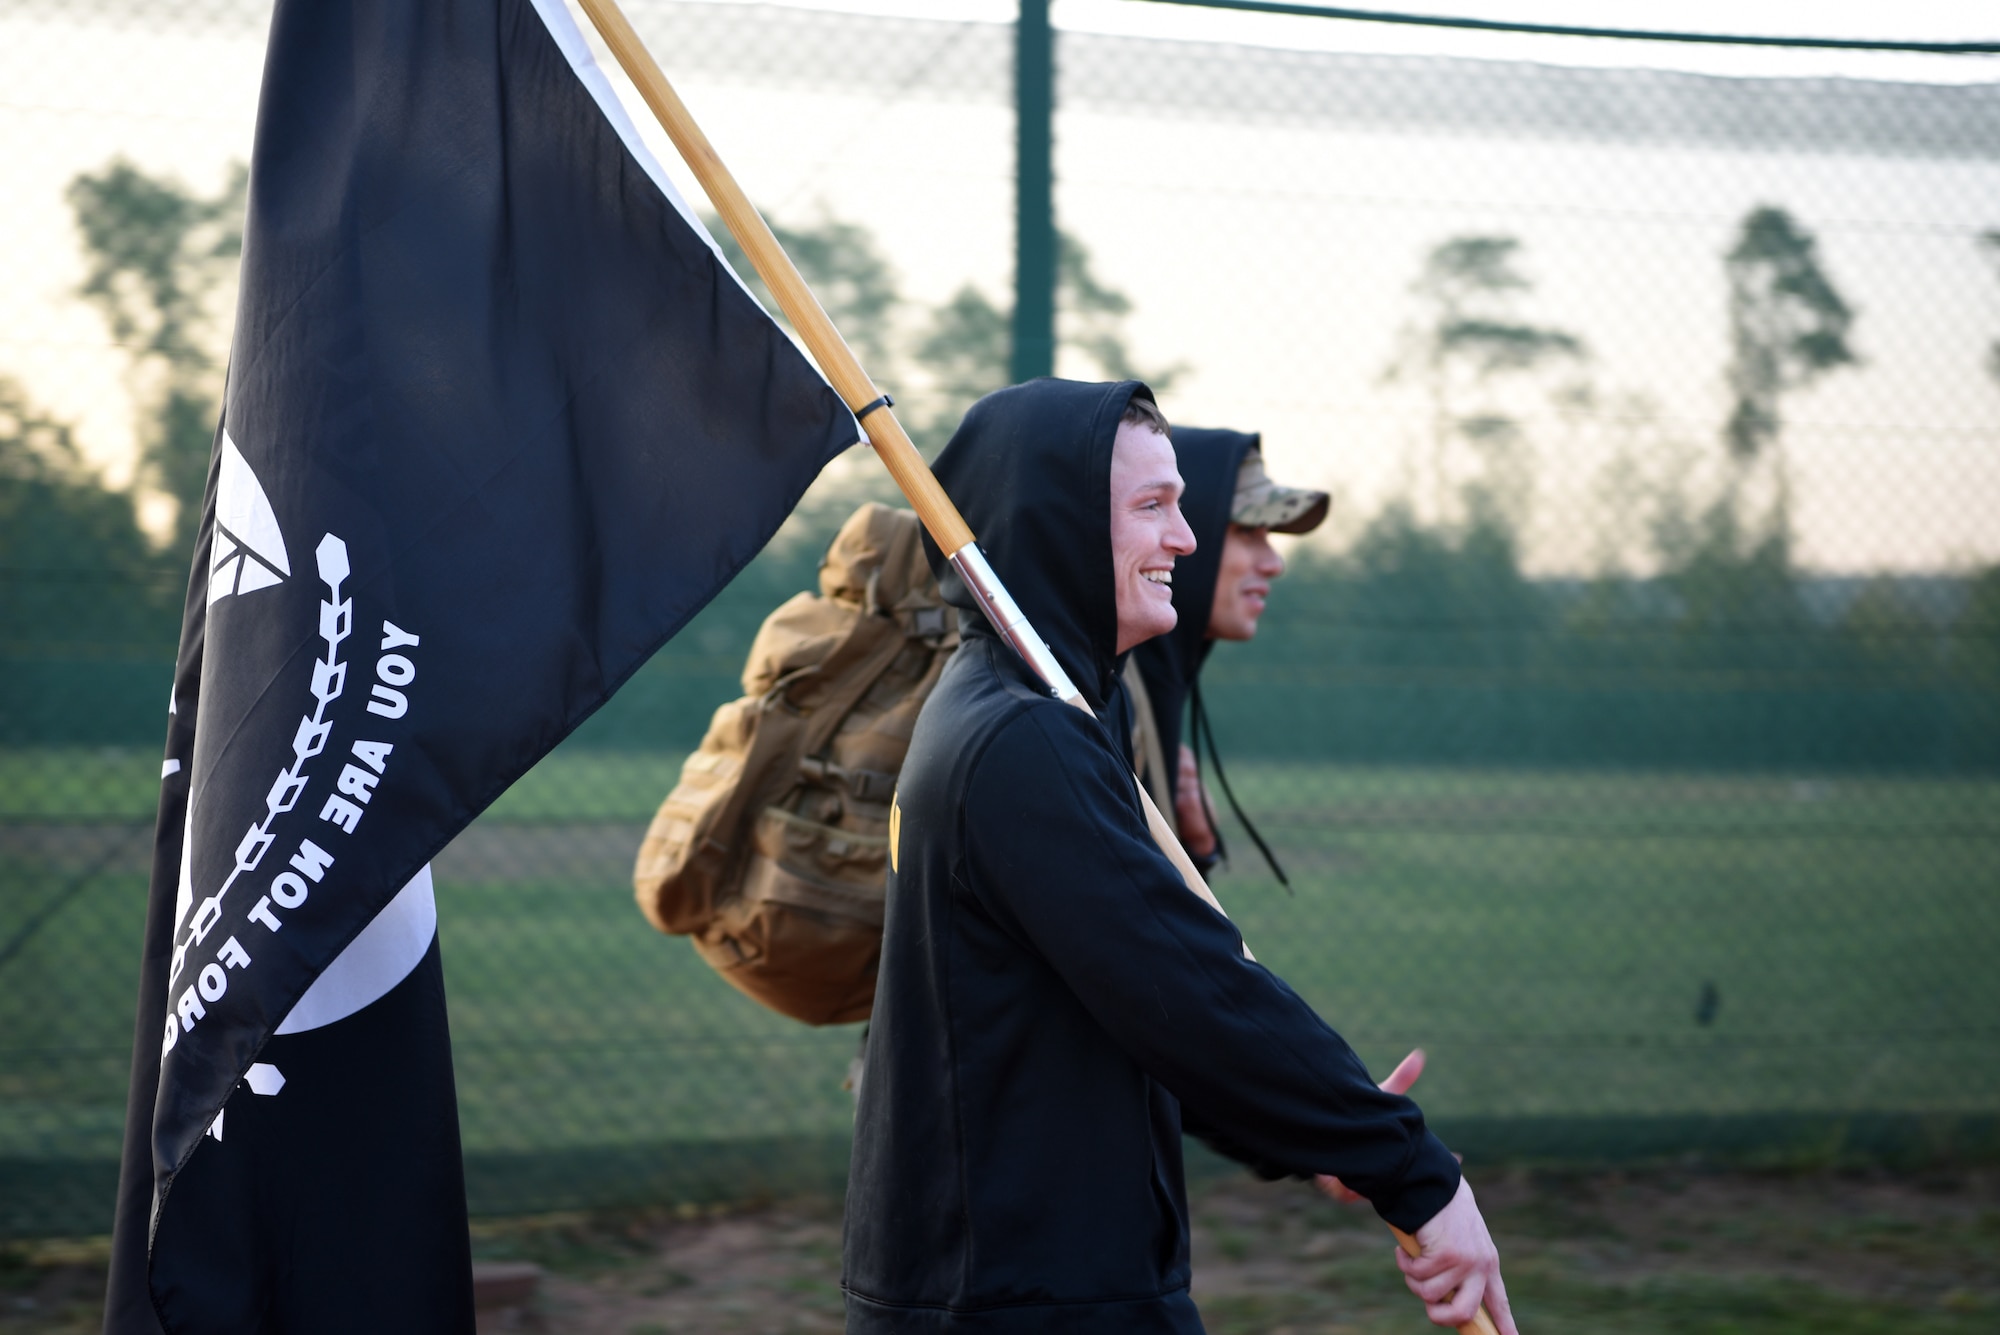 U.S. Air Force Ravens, assigned to the 86th Security Forces Squadron, walk laps around the base track while carrying POW/MIA flags at Ramstein Air Base, Germany, Sept. 18, 2020.